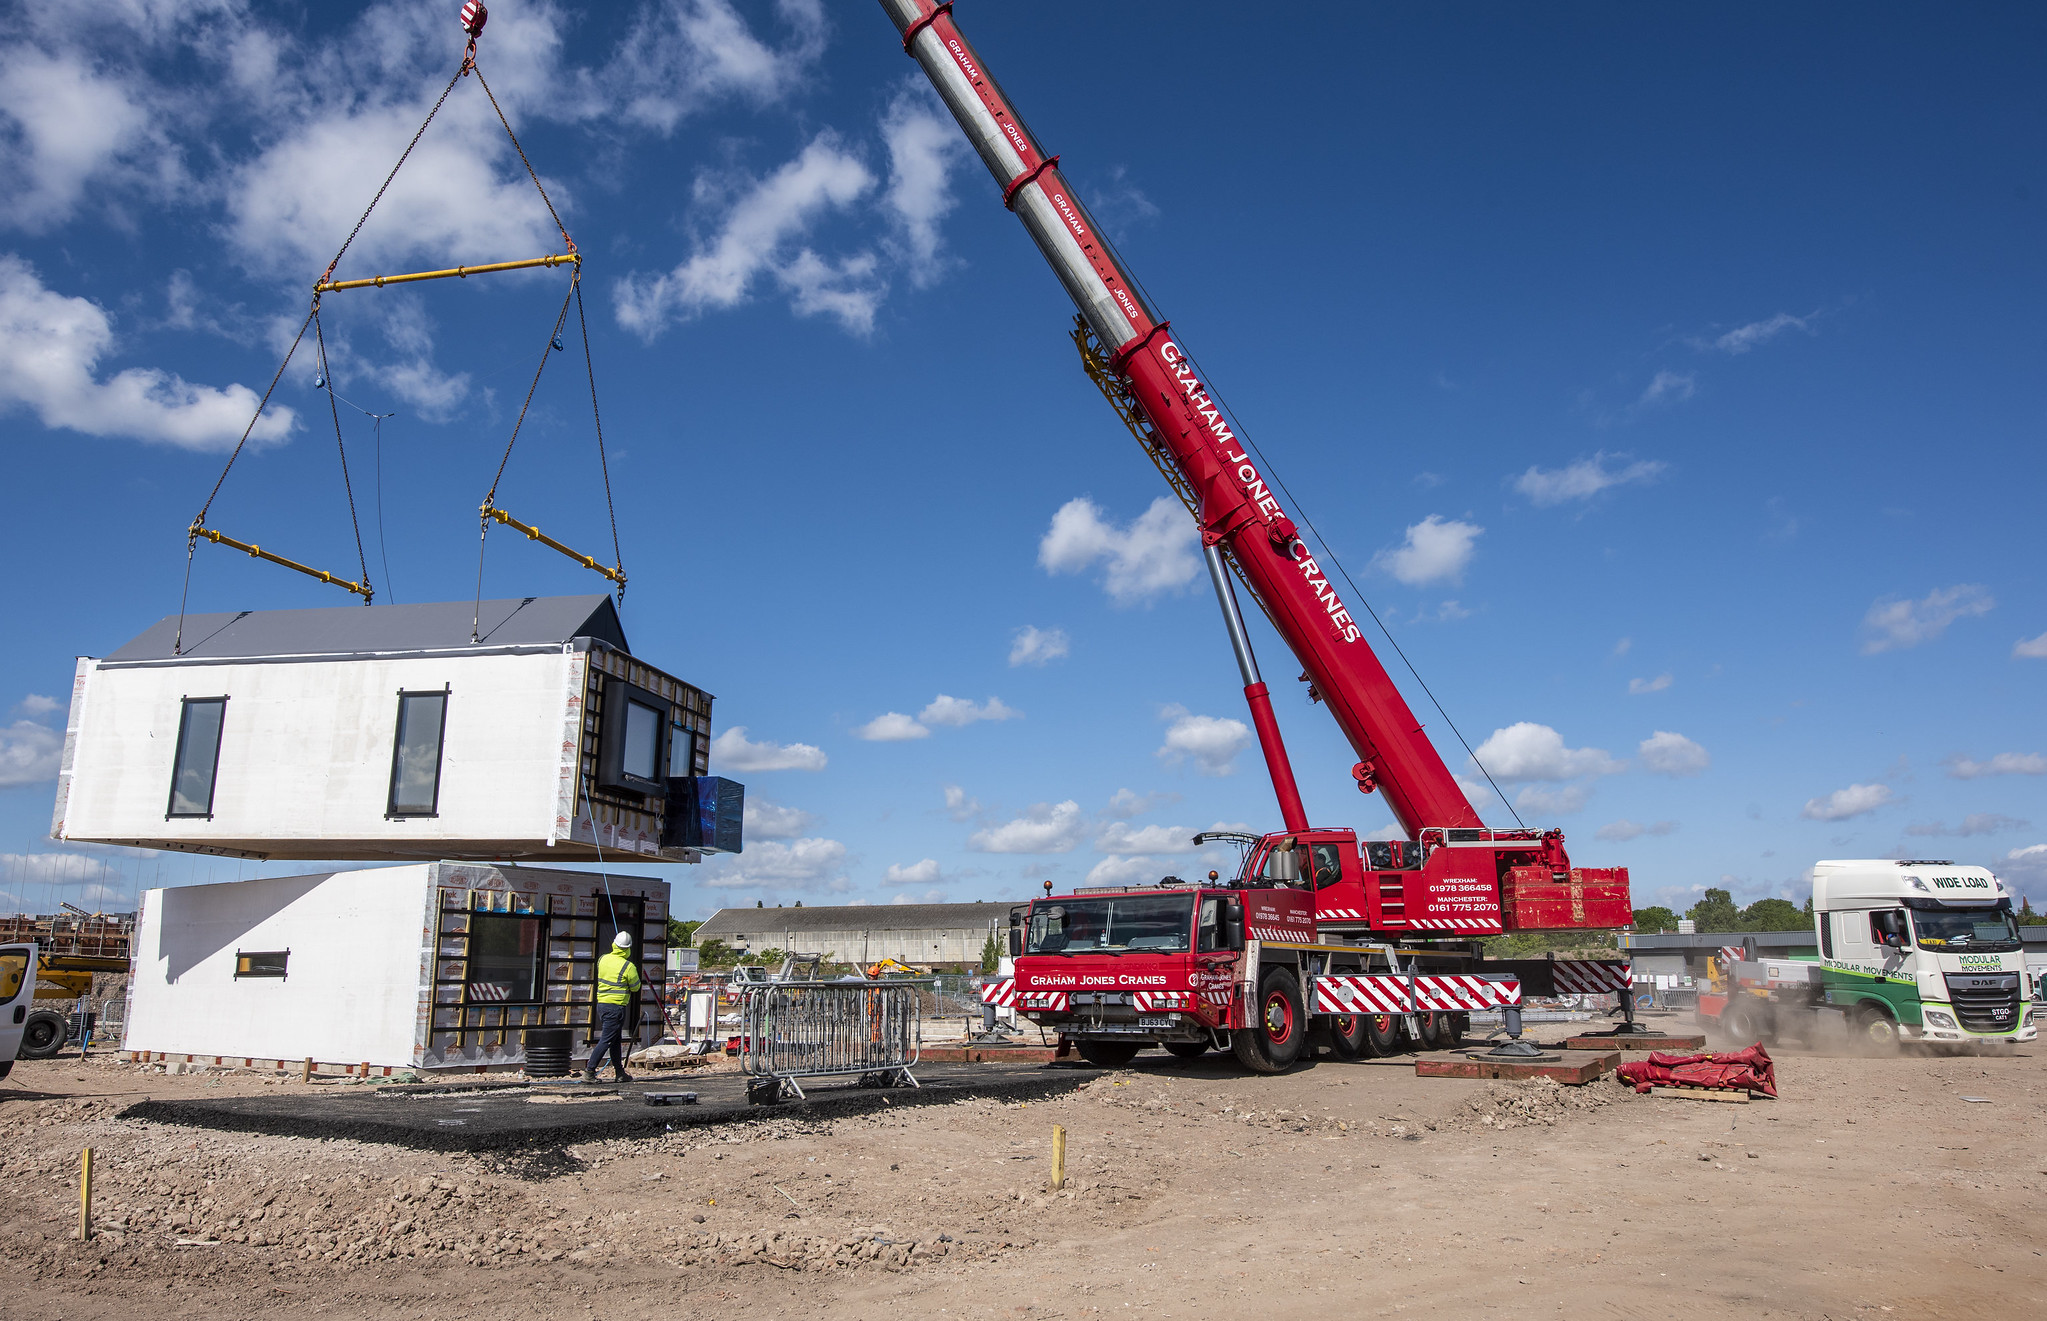 A modular home is craned in on-site in Birmingham. Image courtesy of Urban Splash